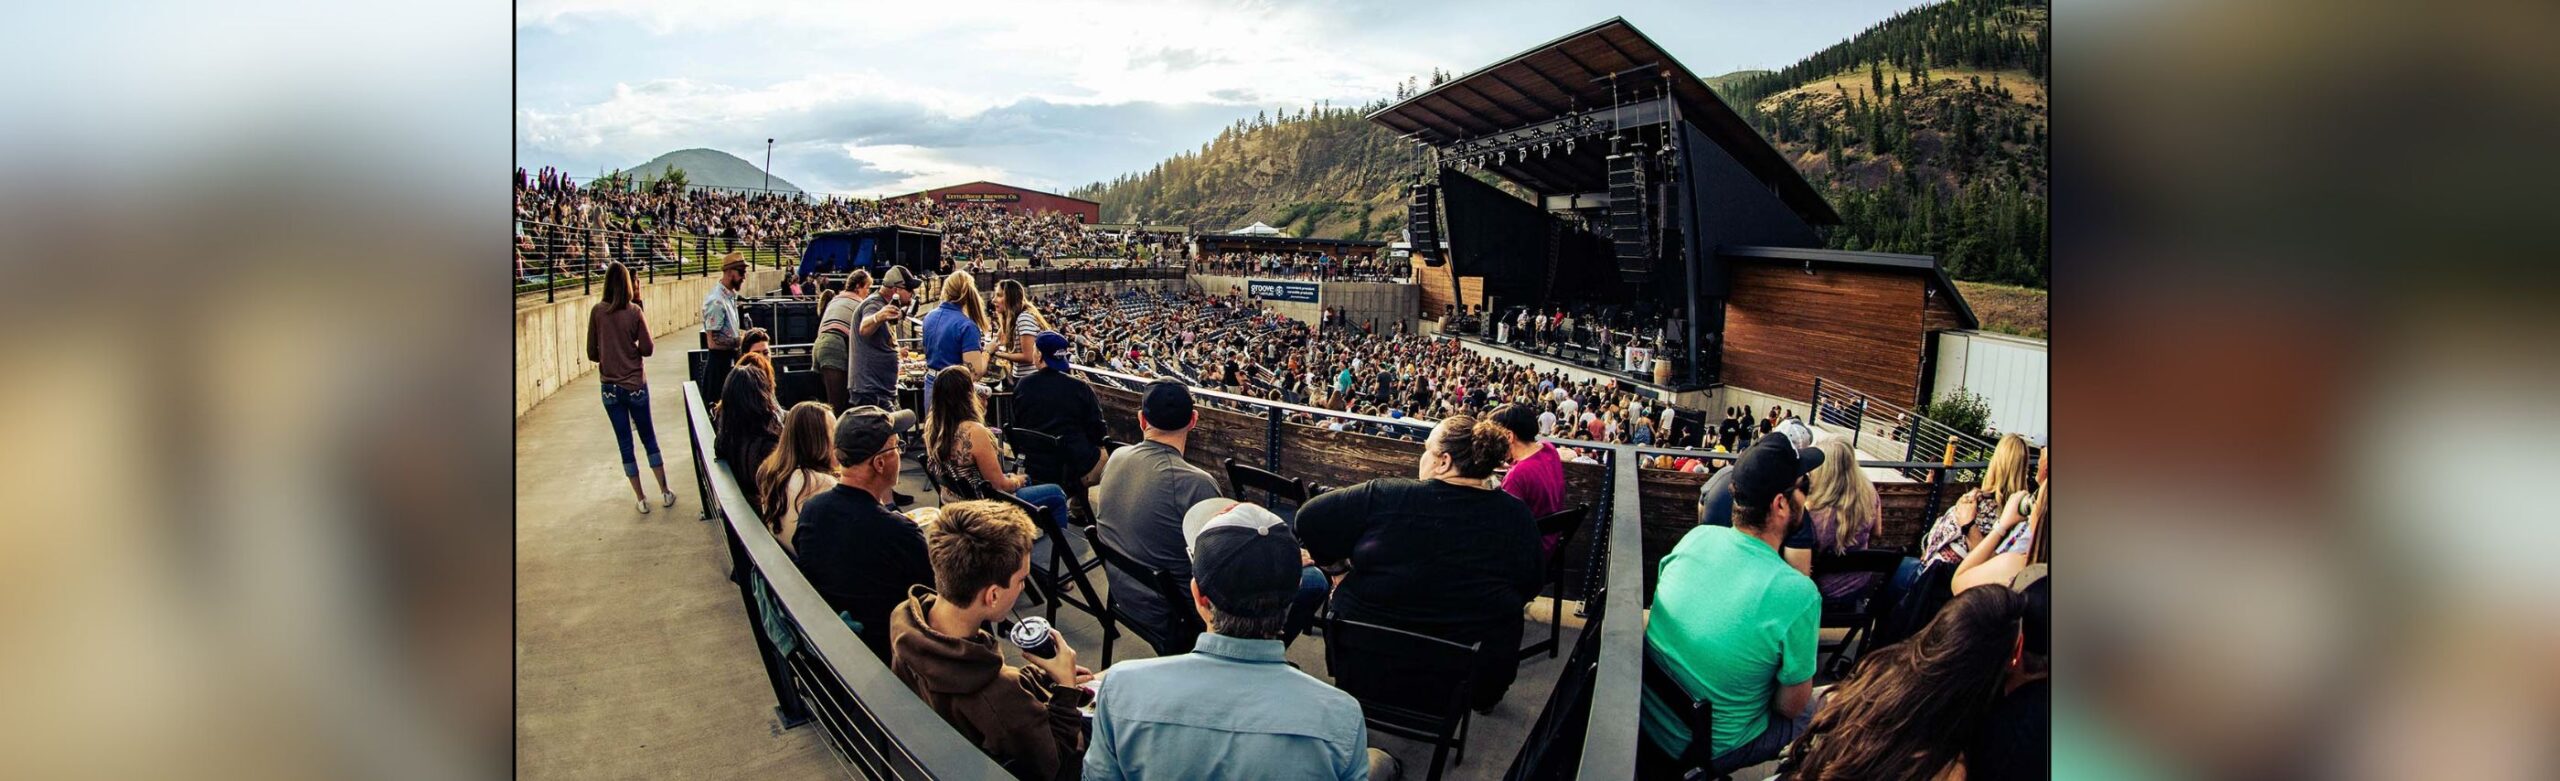 Now Available: Premium Box Seats for Blues Traveler + Big Head Todd and The Monsters at KettleHouse Amphitheater Image